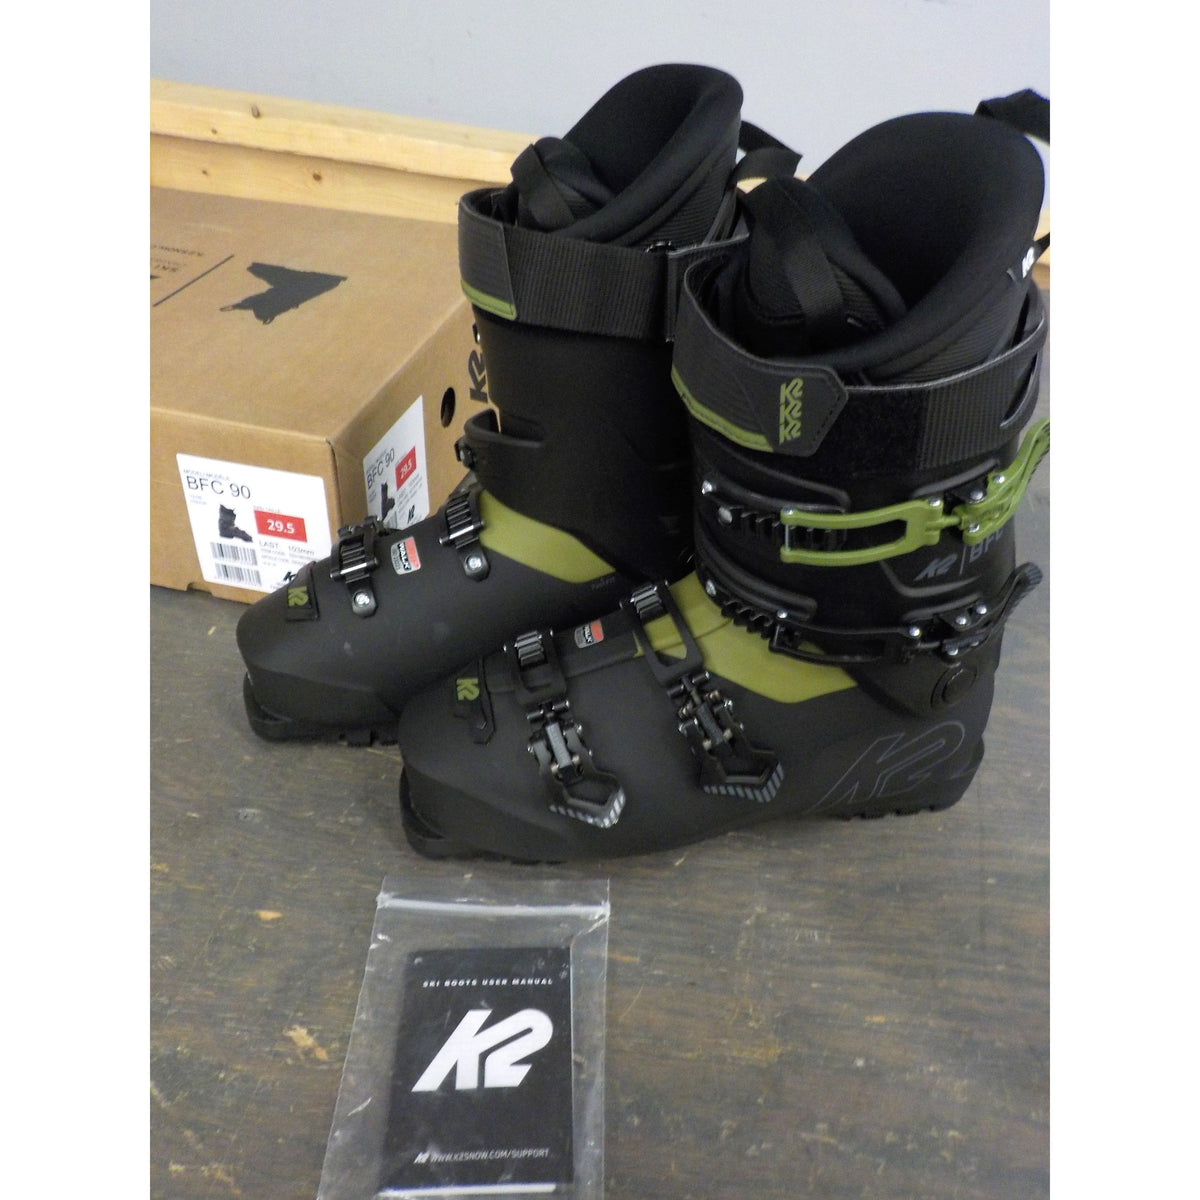 K2 BFC 90 Ski Boots - 29.5 - Used - Acceptable